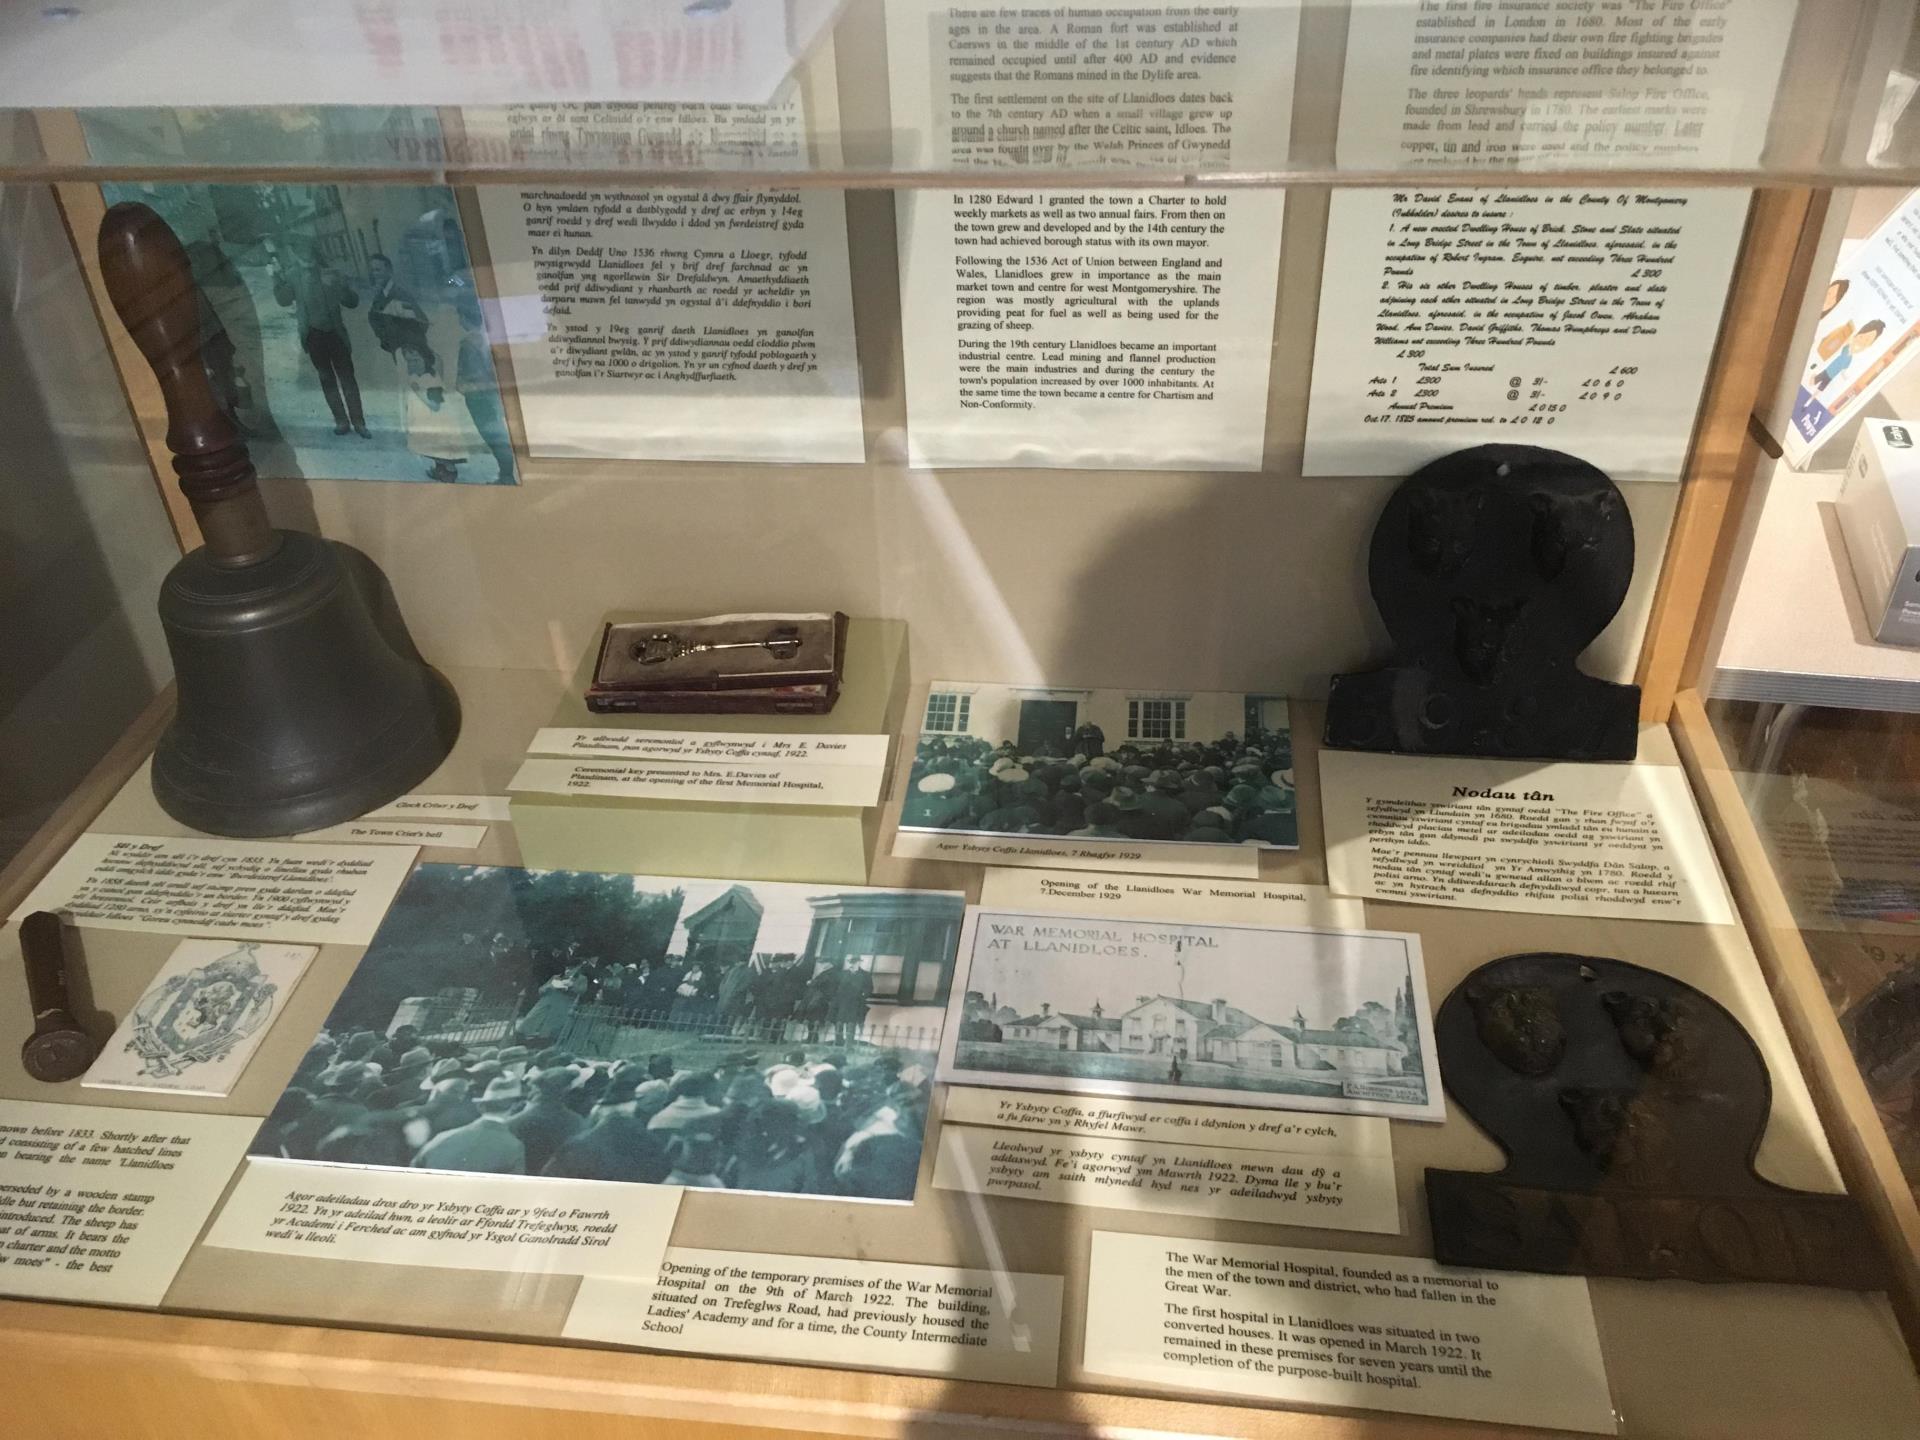 Display of items related to Llanidloes